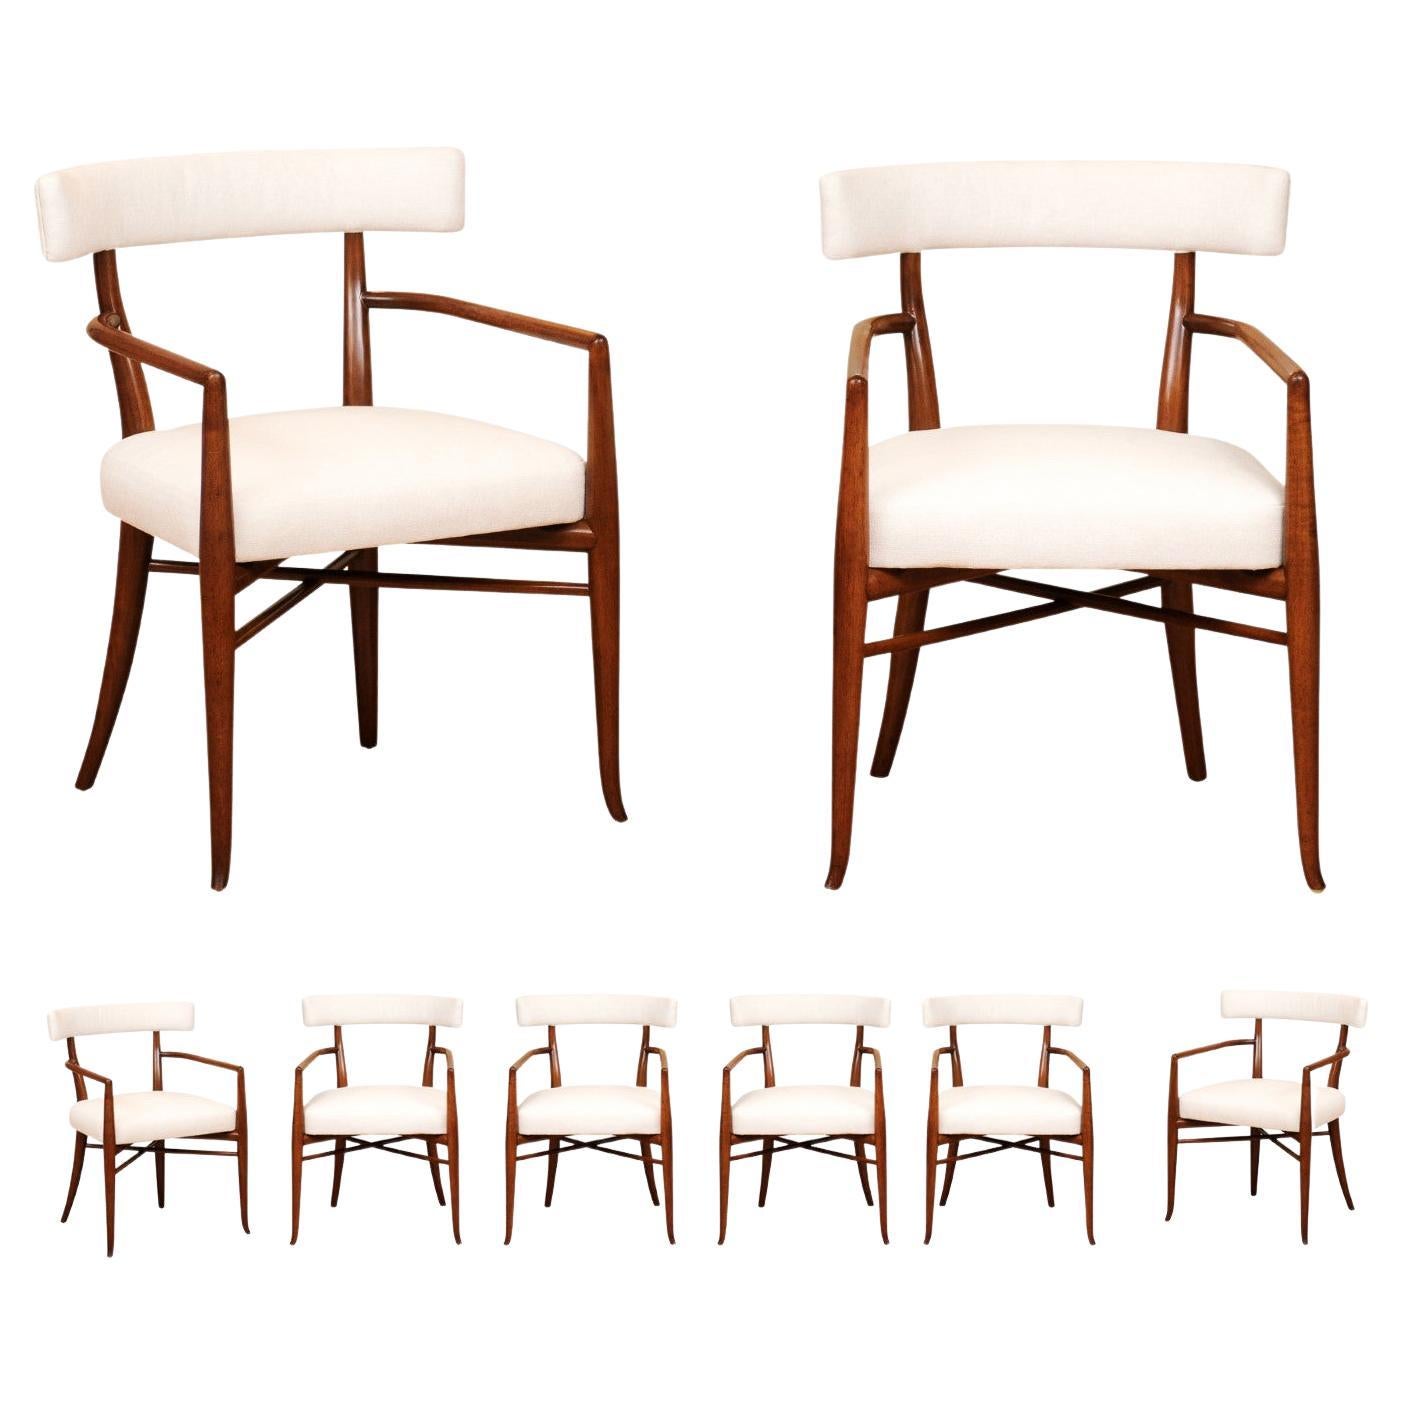 All Arms, Extraordinary Set of 8 Modern Klismos Chairs by Robsjohn-Gibbings For Sale